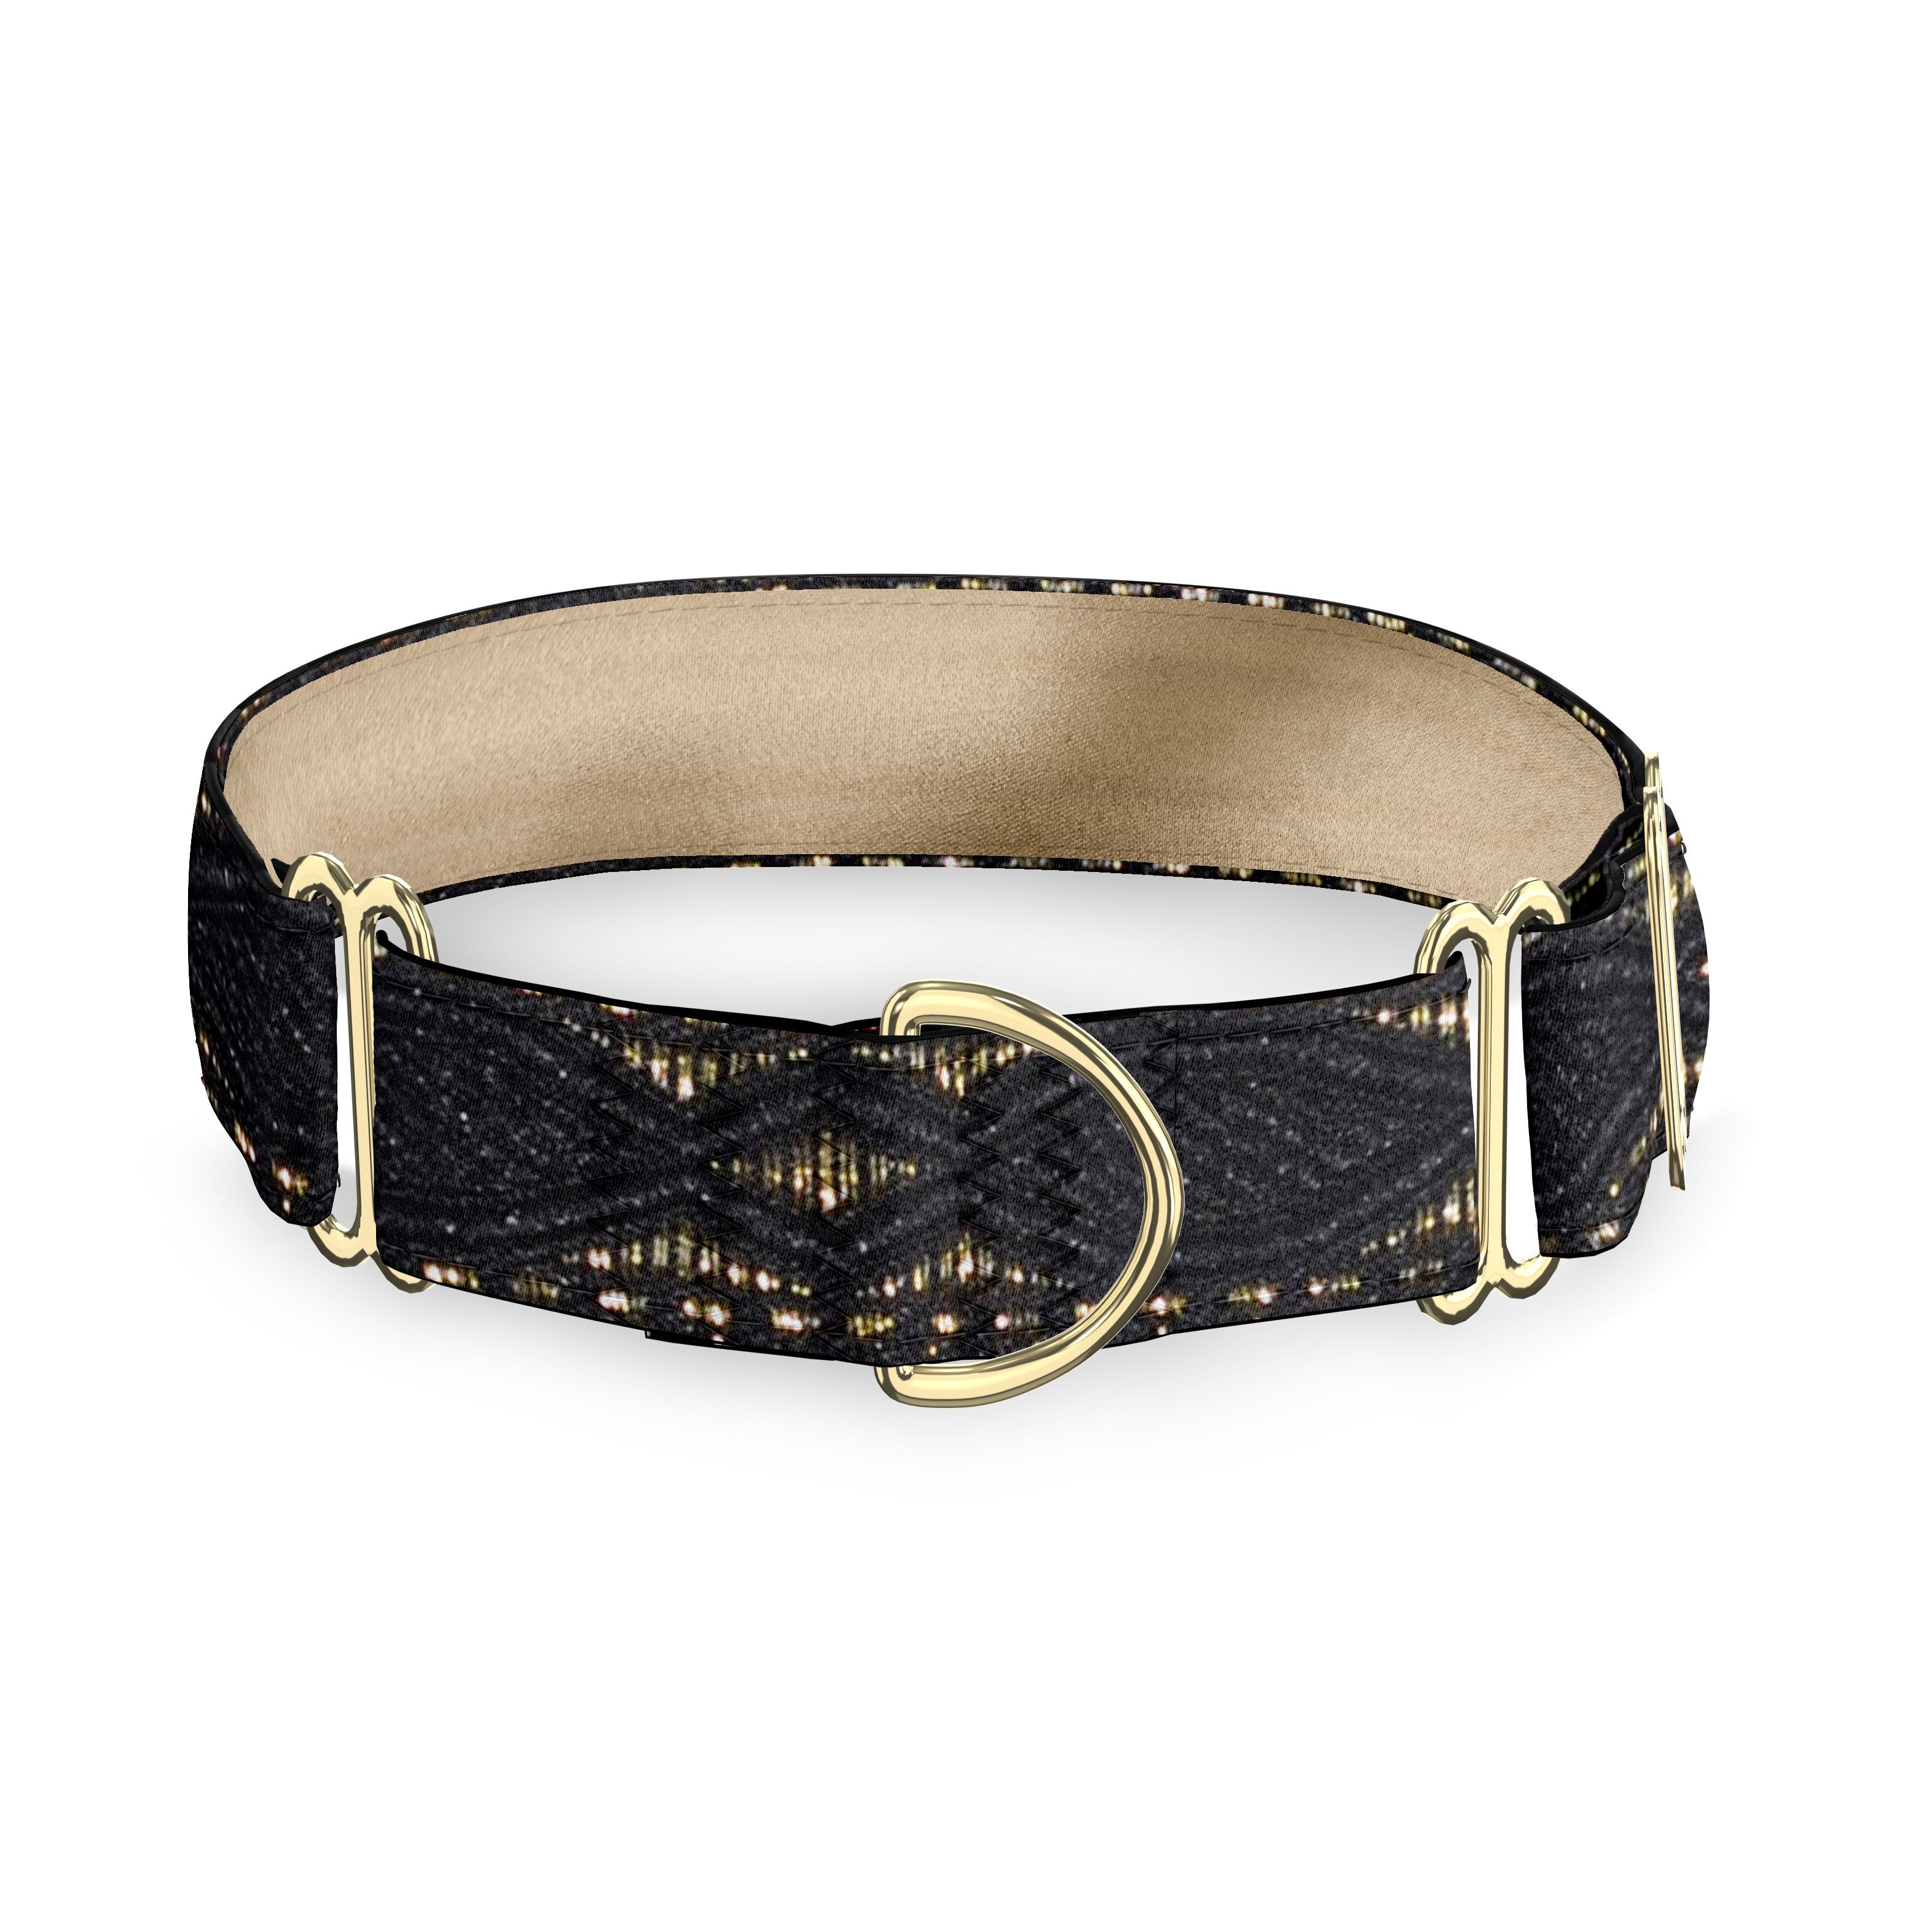 Oxford Black and Gold Dog Collar